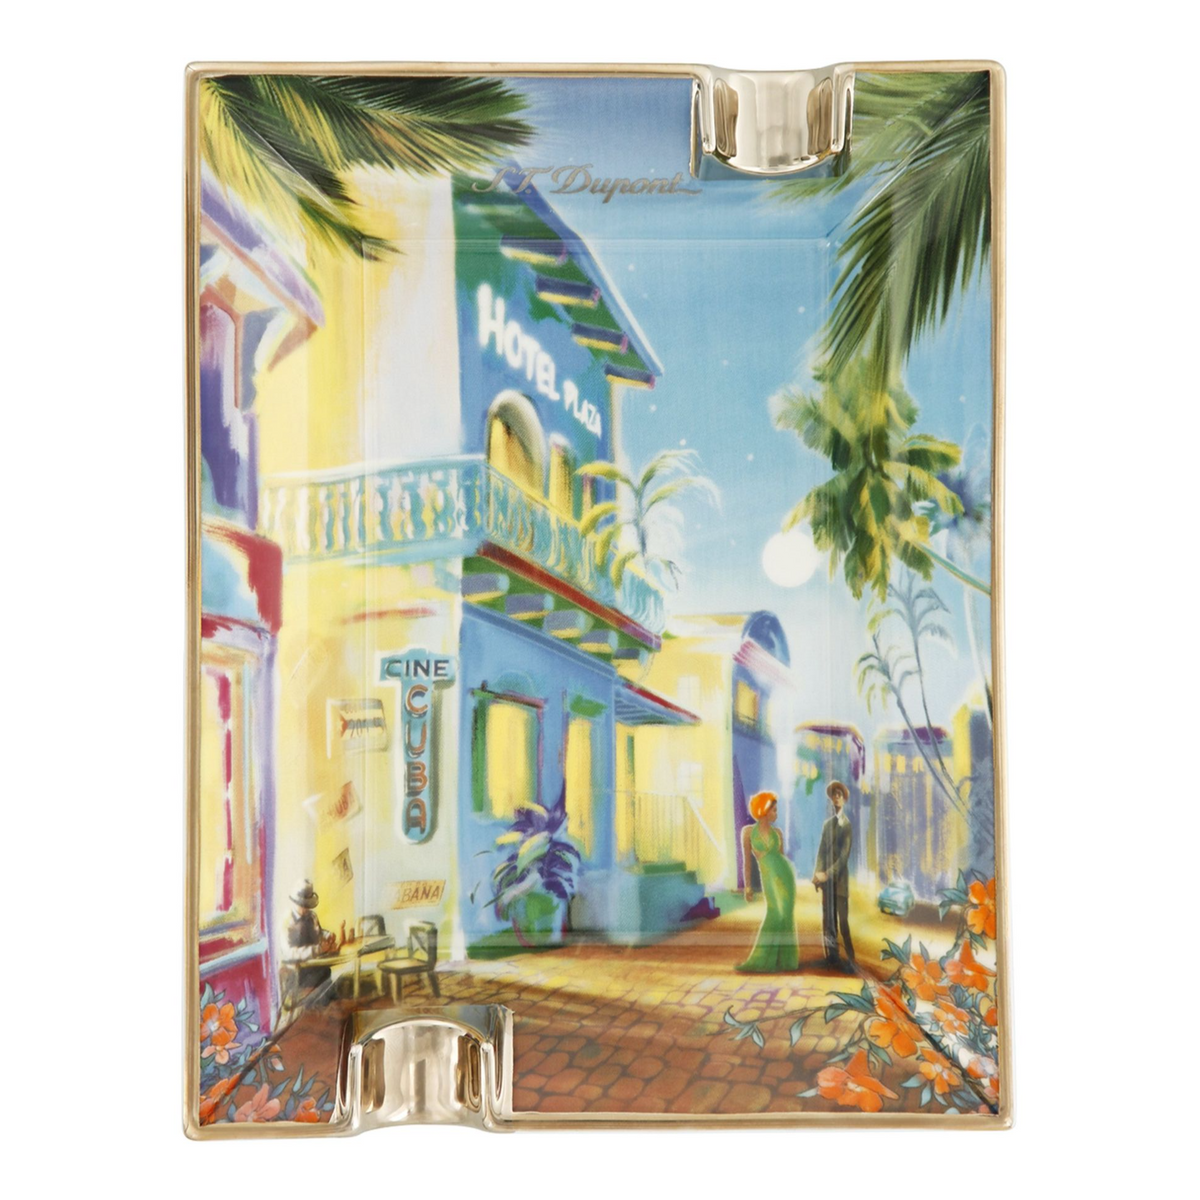 An exquisite porcelain ashtray featuring a colorful painted scene of a tropical street with palm trees, buildings, and two people talking under the moonlight. Designed with cigar grooves for added functionality, the H4cm x W22cm x D17cm approx. by KirbyAllison.com is a perfect blend of art and utility.